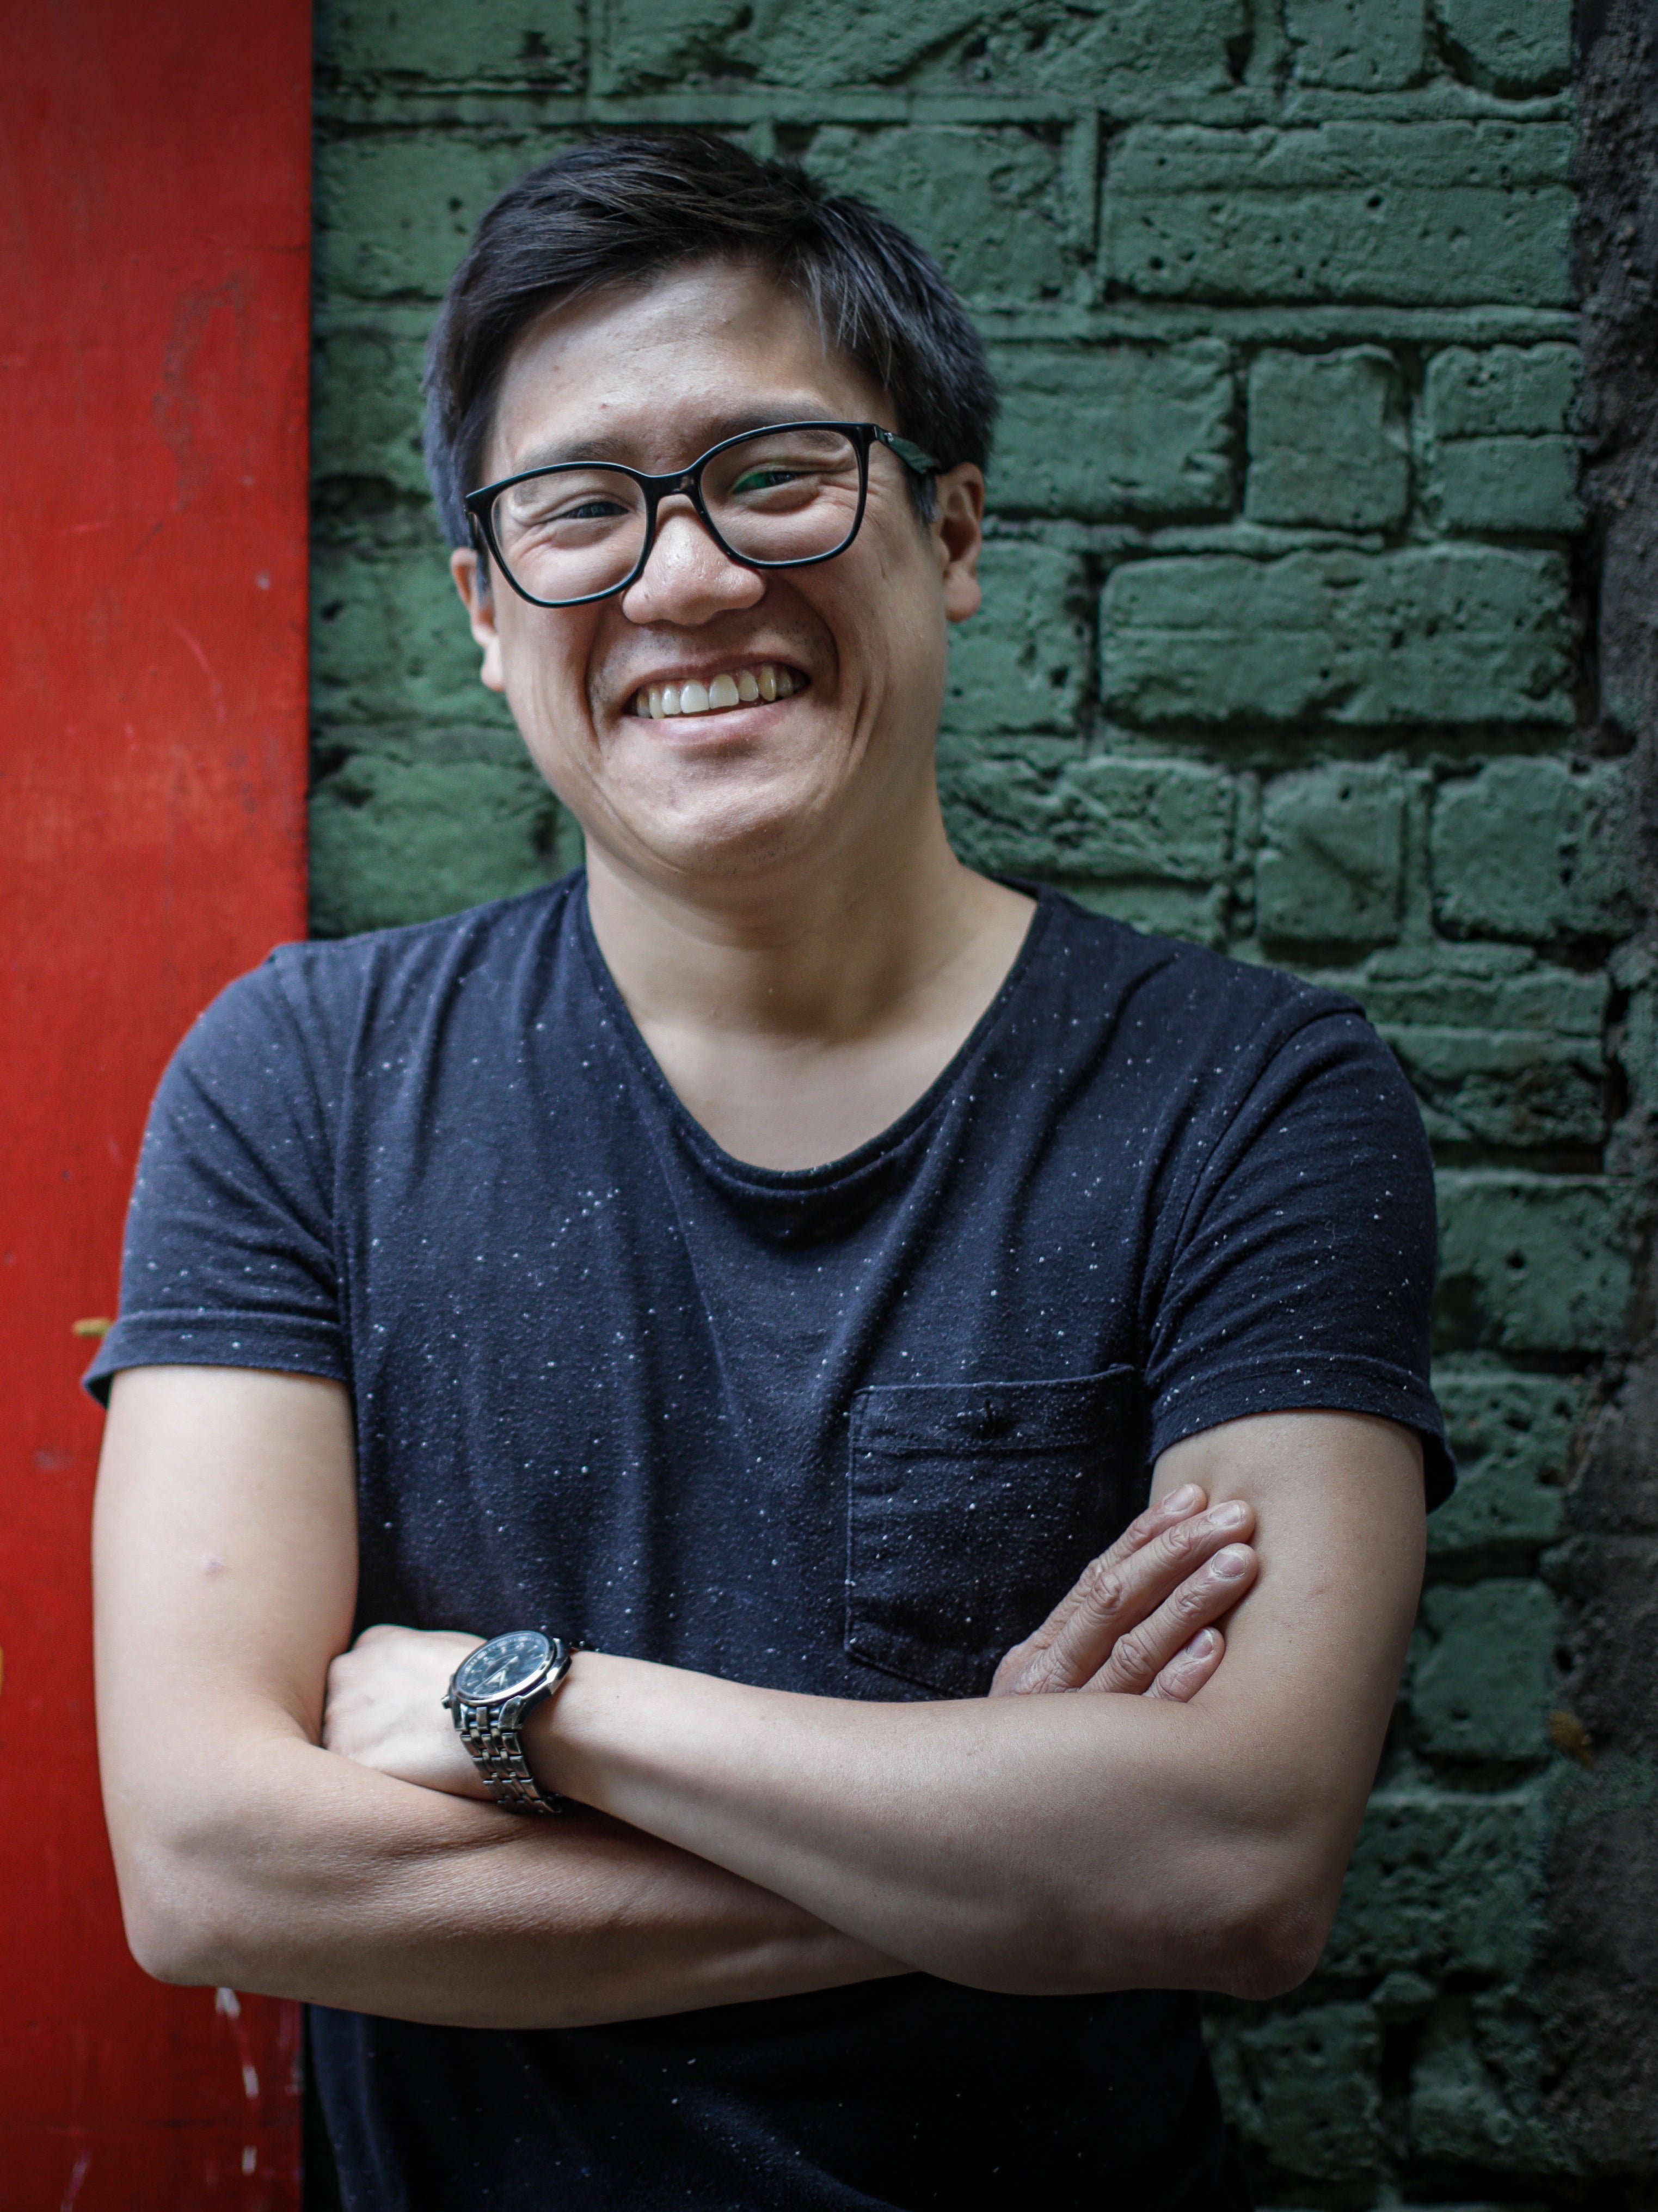 Jeremy Pang founded the School of Wok, an award-winning Asian cookery school, in 2009